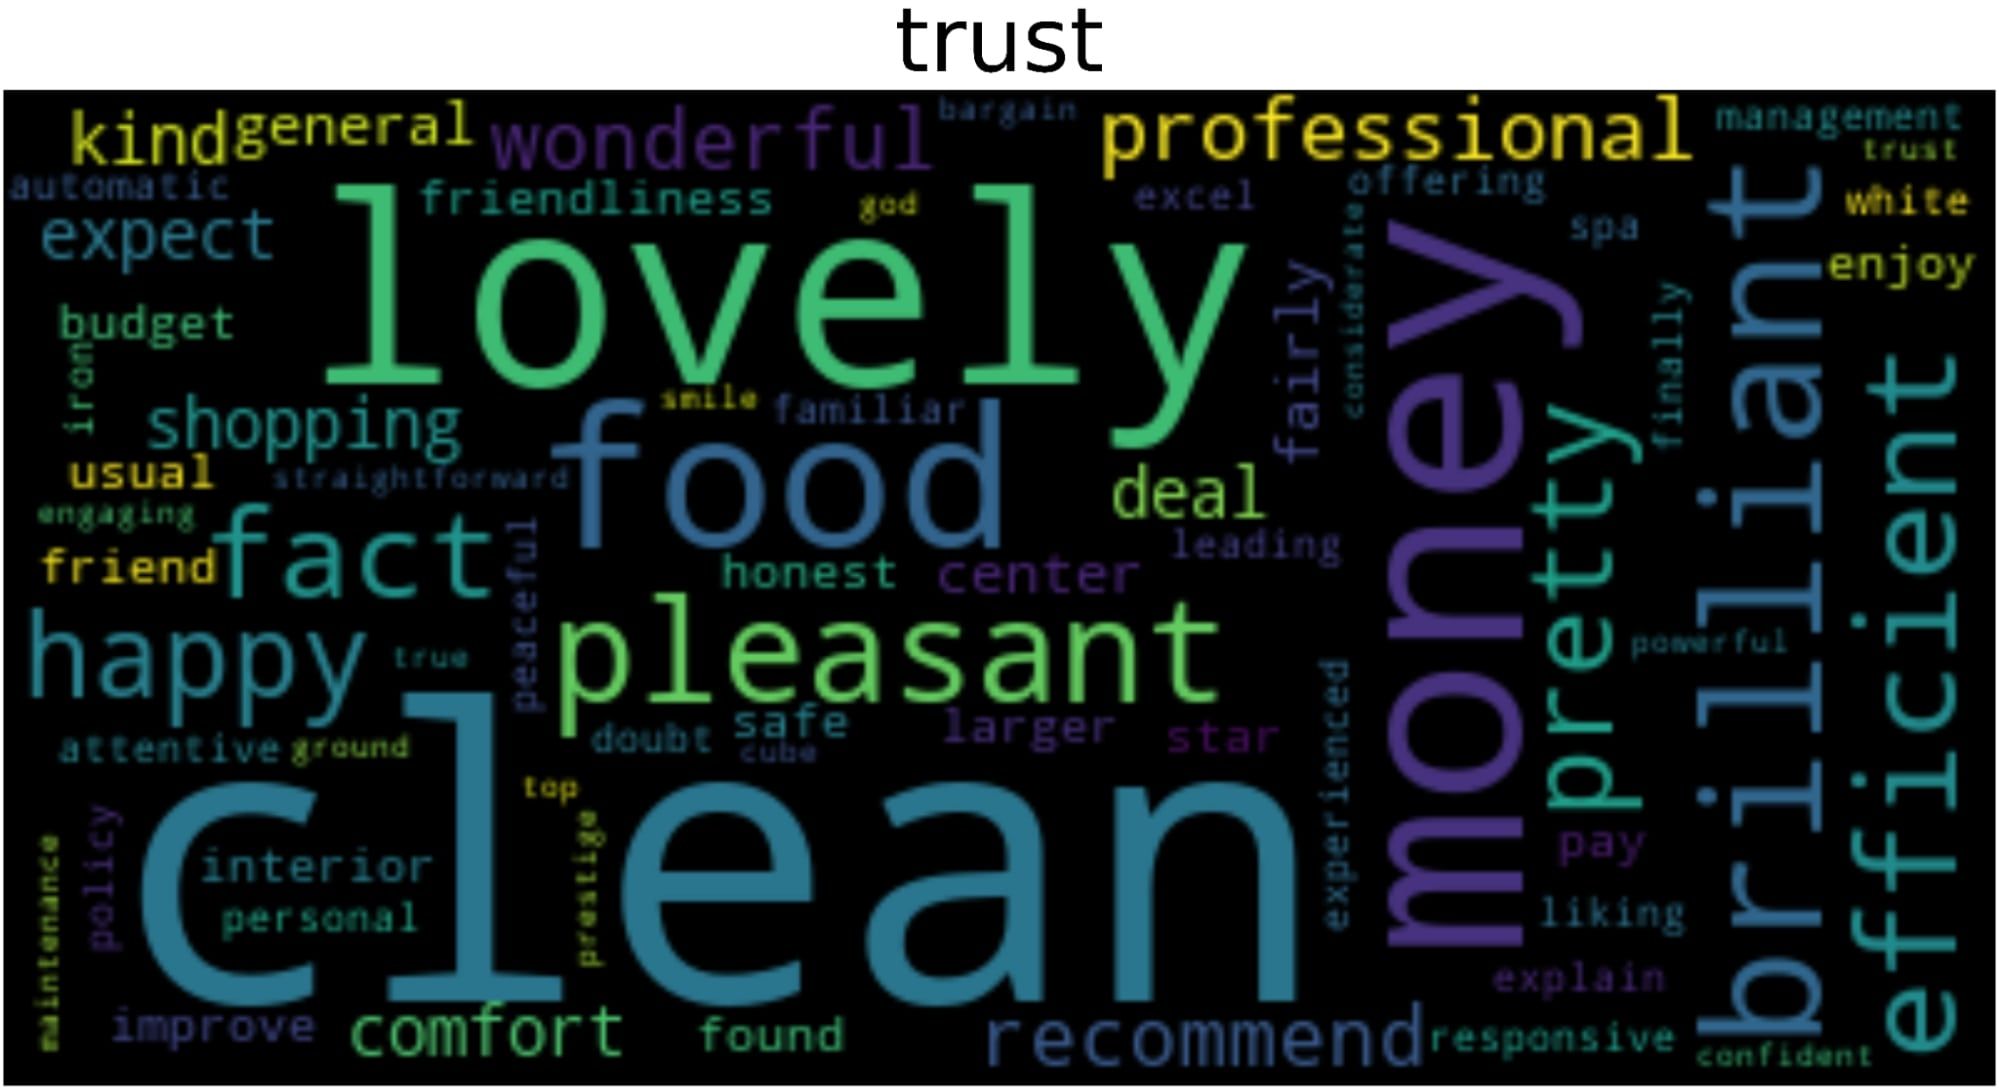 Word cloud generated from trust emotion within positive reviews.